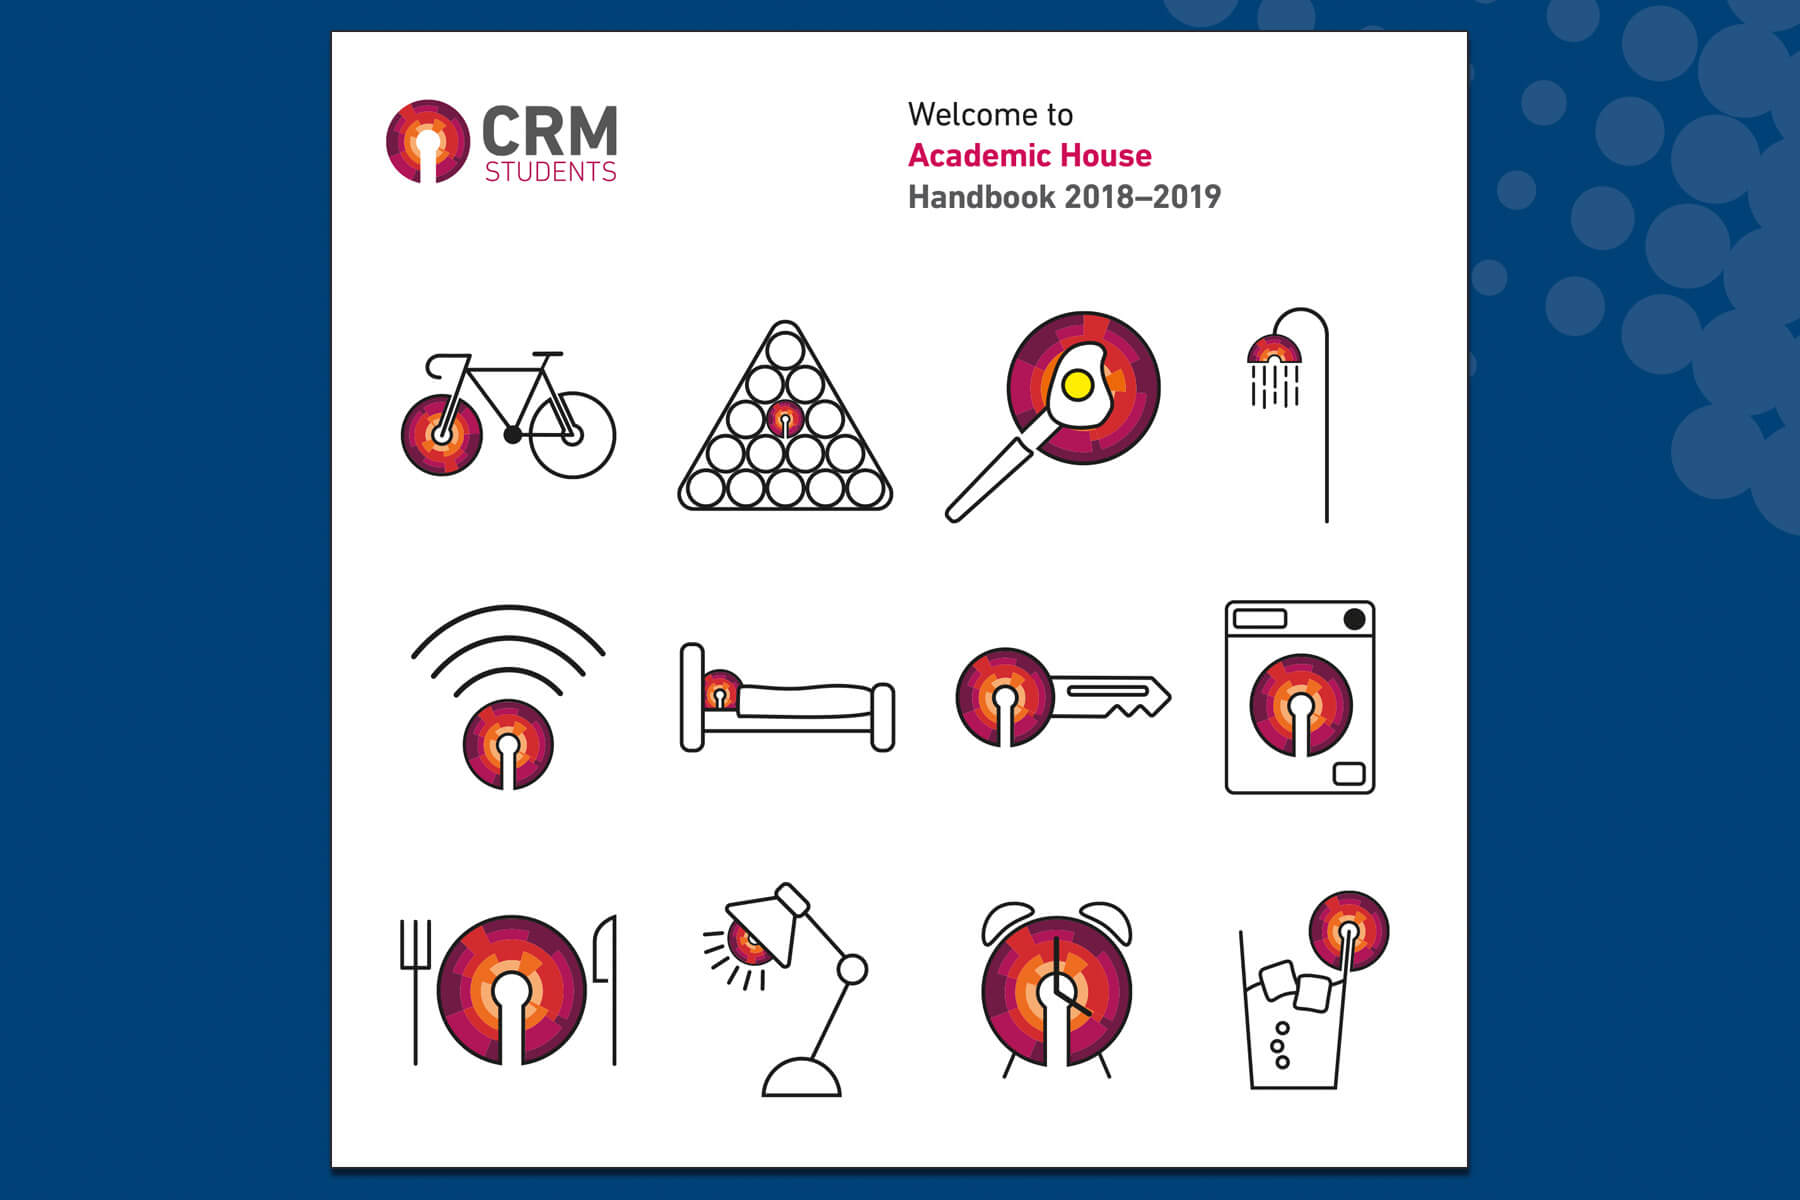 <div class="overlay" style="background-image: url('/Portals/_default/Skins/HolyWellPress/Thumbnail-Corner-Dots.svg')">
<div class="overlaytext">
<h2>icon design<br />
and campaign creative</h2>

<h3>CRM Students</h3>
</div>
</div>
